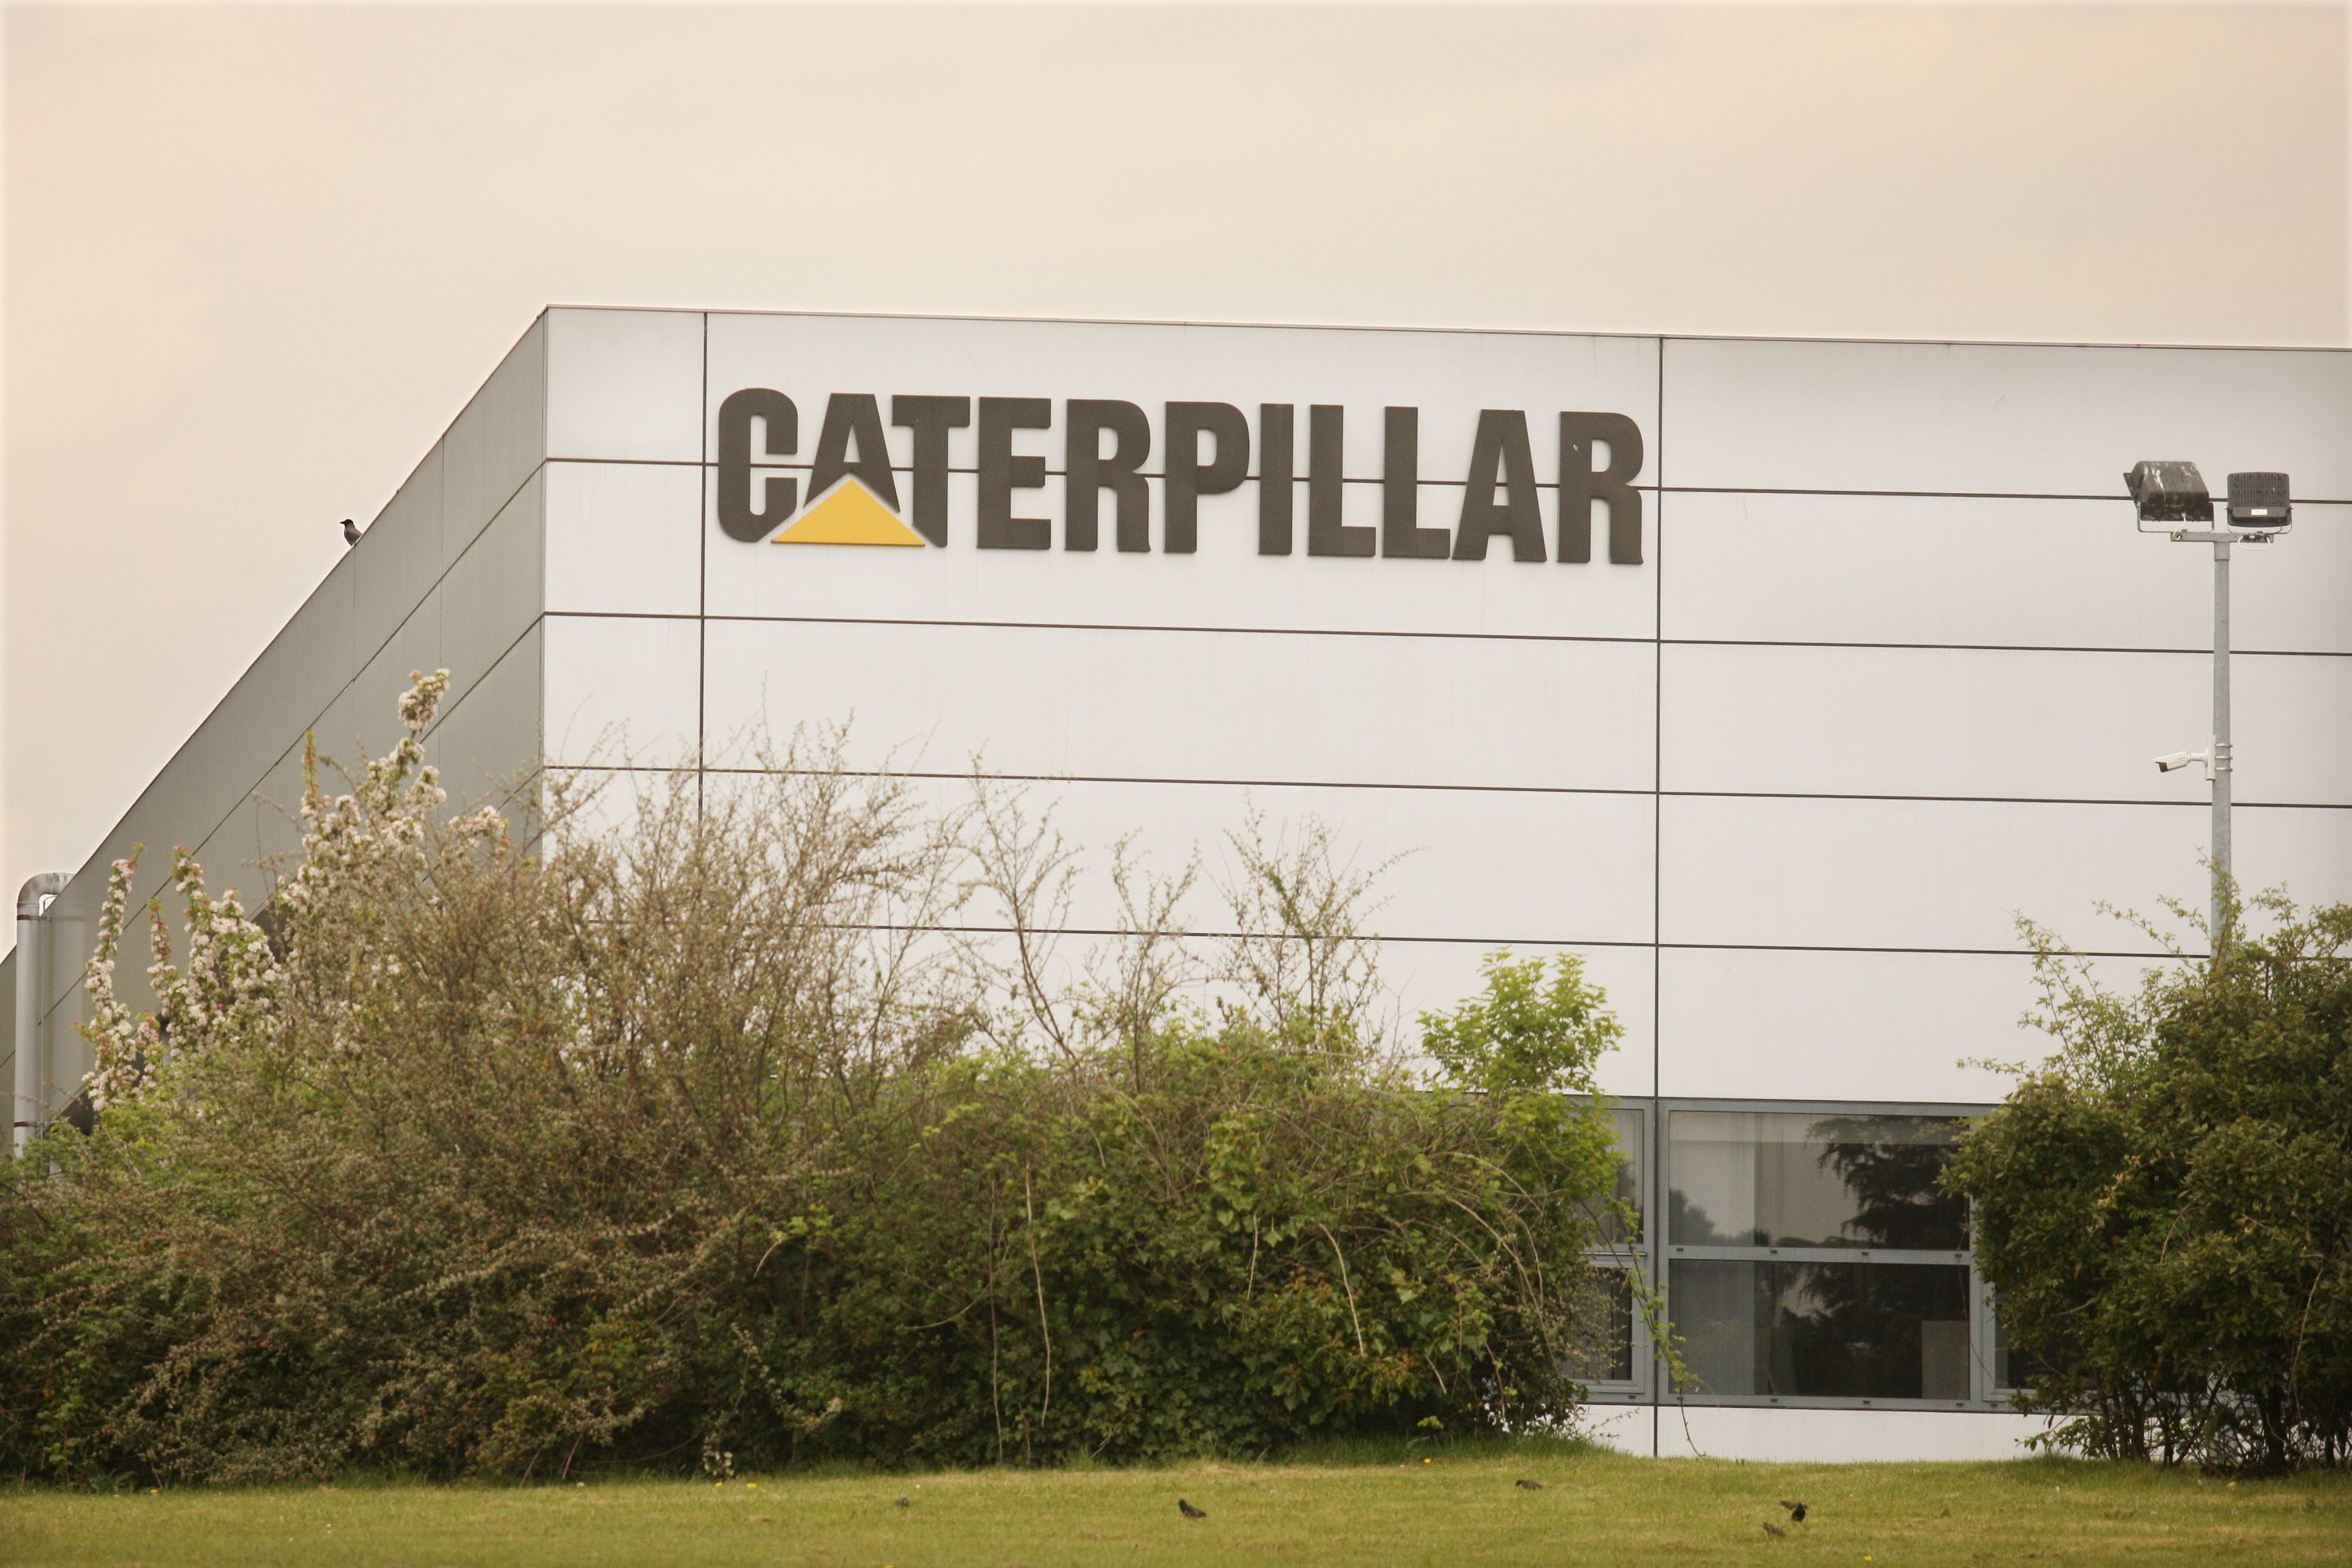 NOT FOR SALE: The Caterpillar plant at Springvale